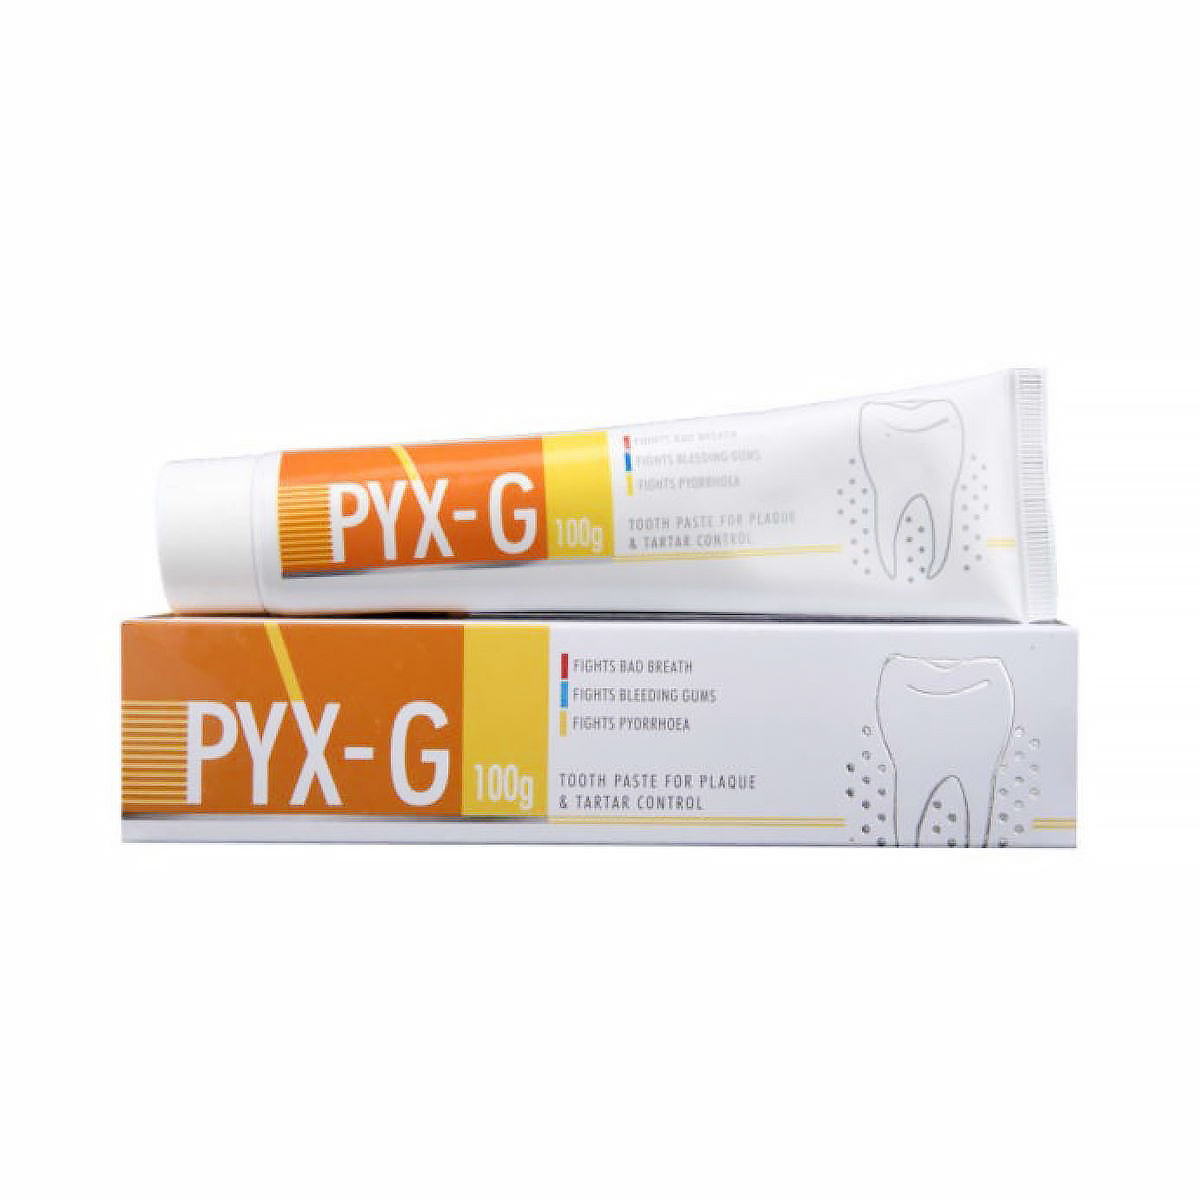 PYX-G Toothpaste, 100 gm, Pack of 1 